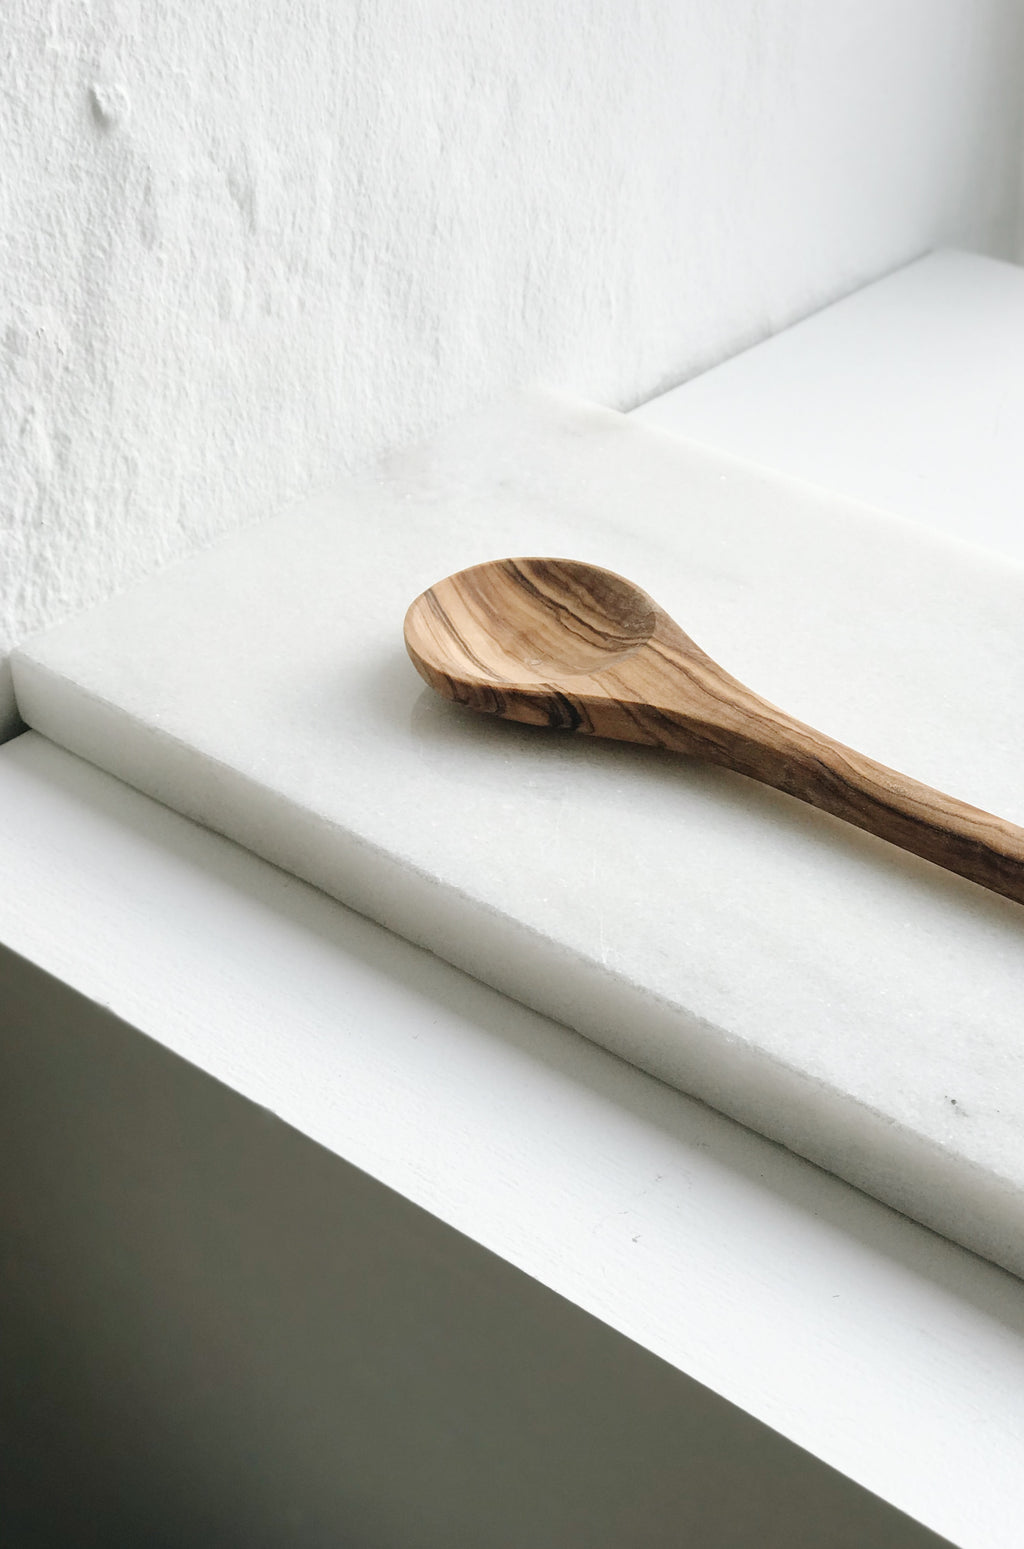 Cooking Spoon